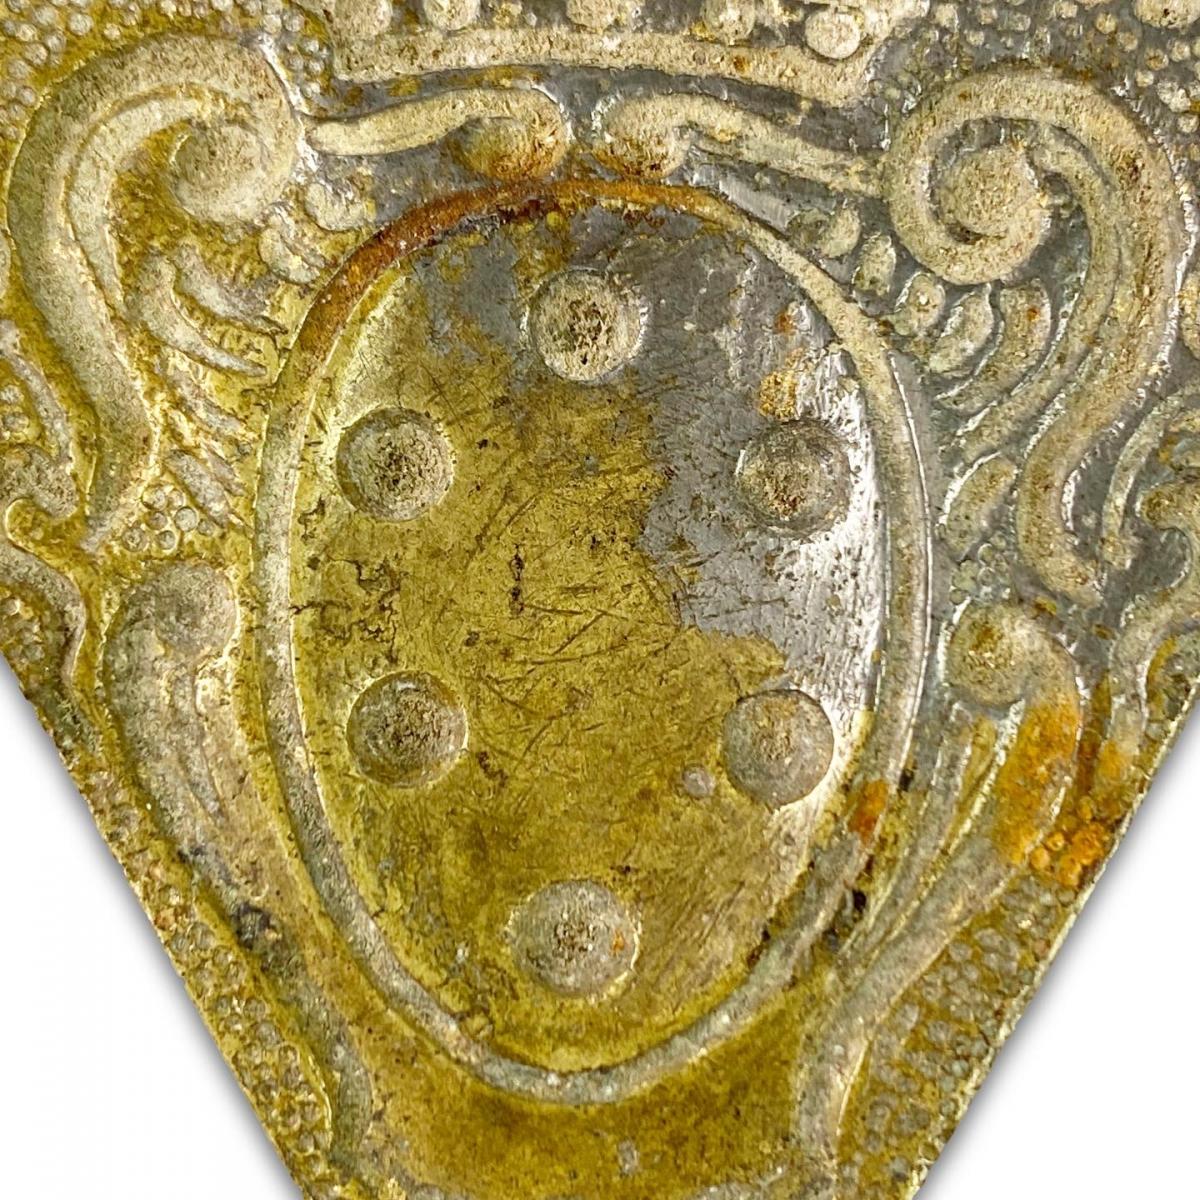 Bronze die with the Medici family coat of arms. Italian, late 17th century